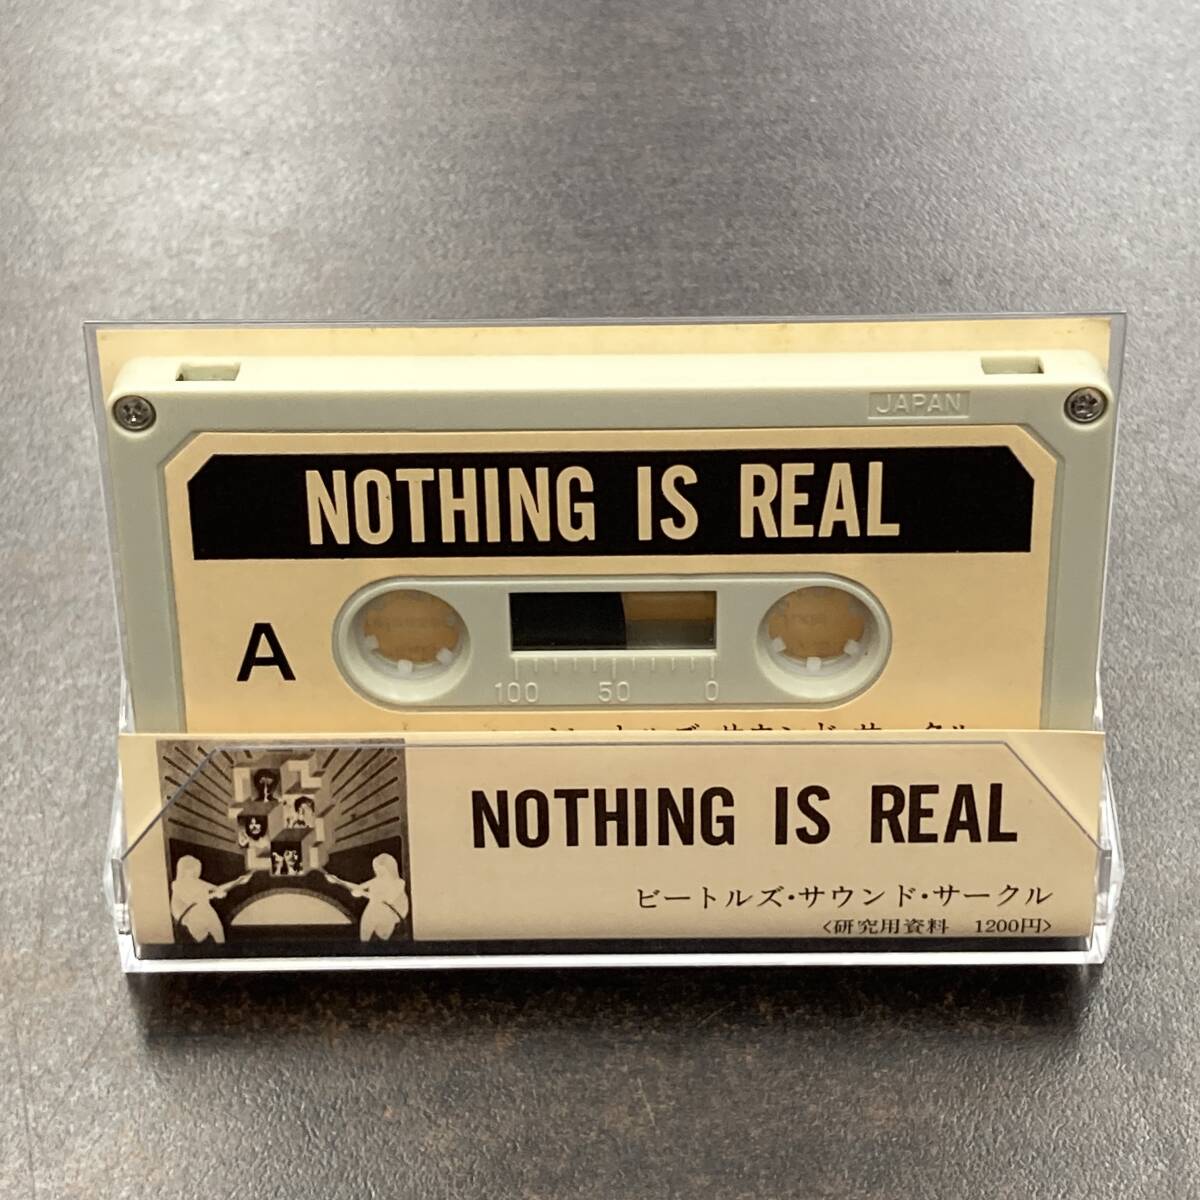 1217M ザ・ビートルズ 研究資料 NOTHING IS REAL カセットテープ / THE BEATLES Research materials Cassette Tapeの画像1